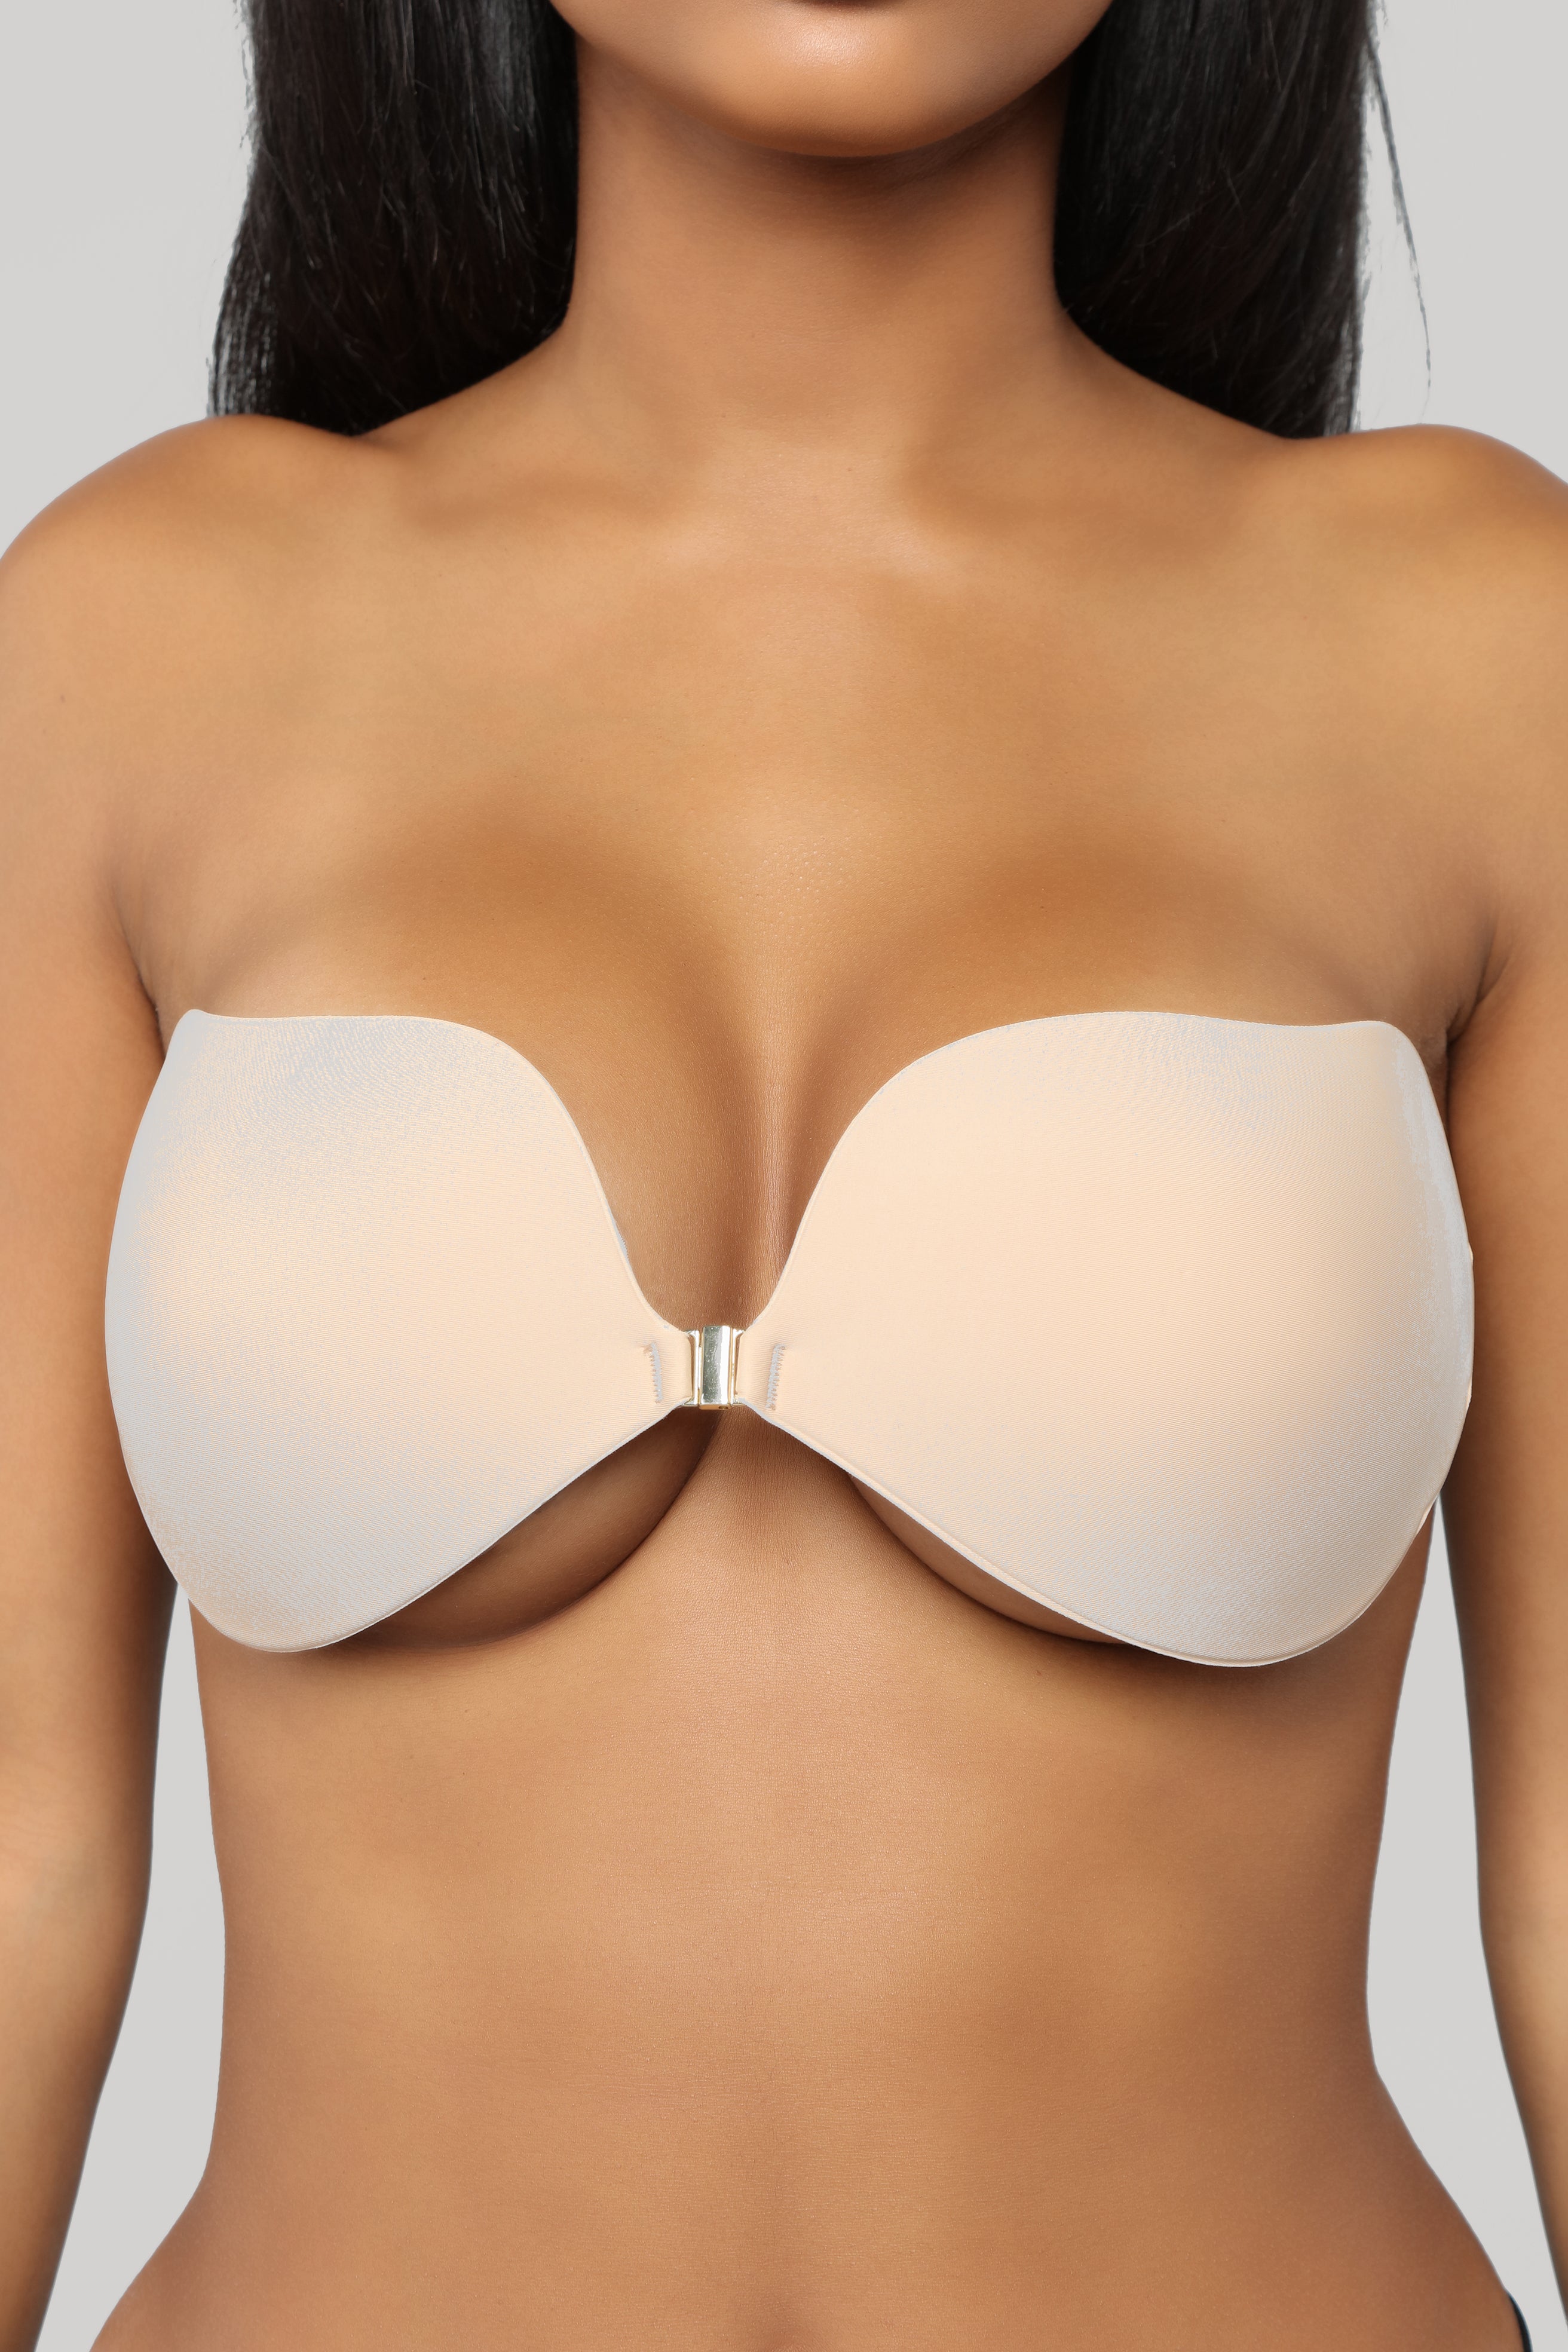 Invisible Bra Review